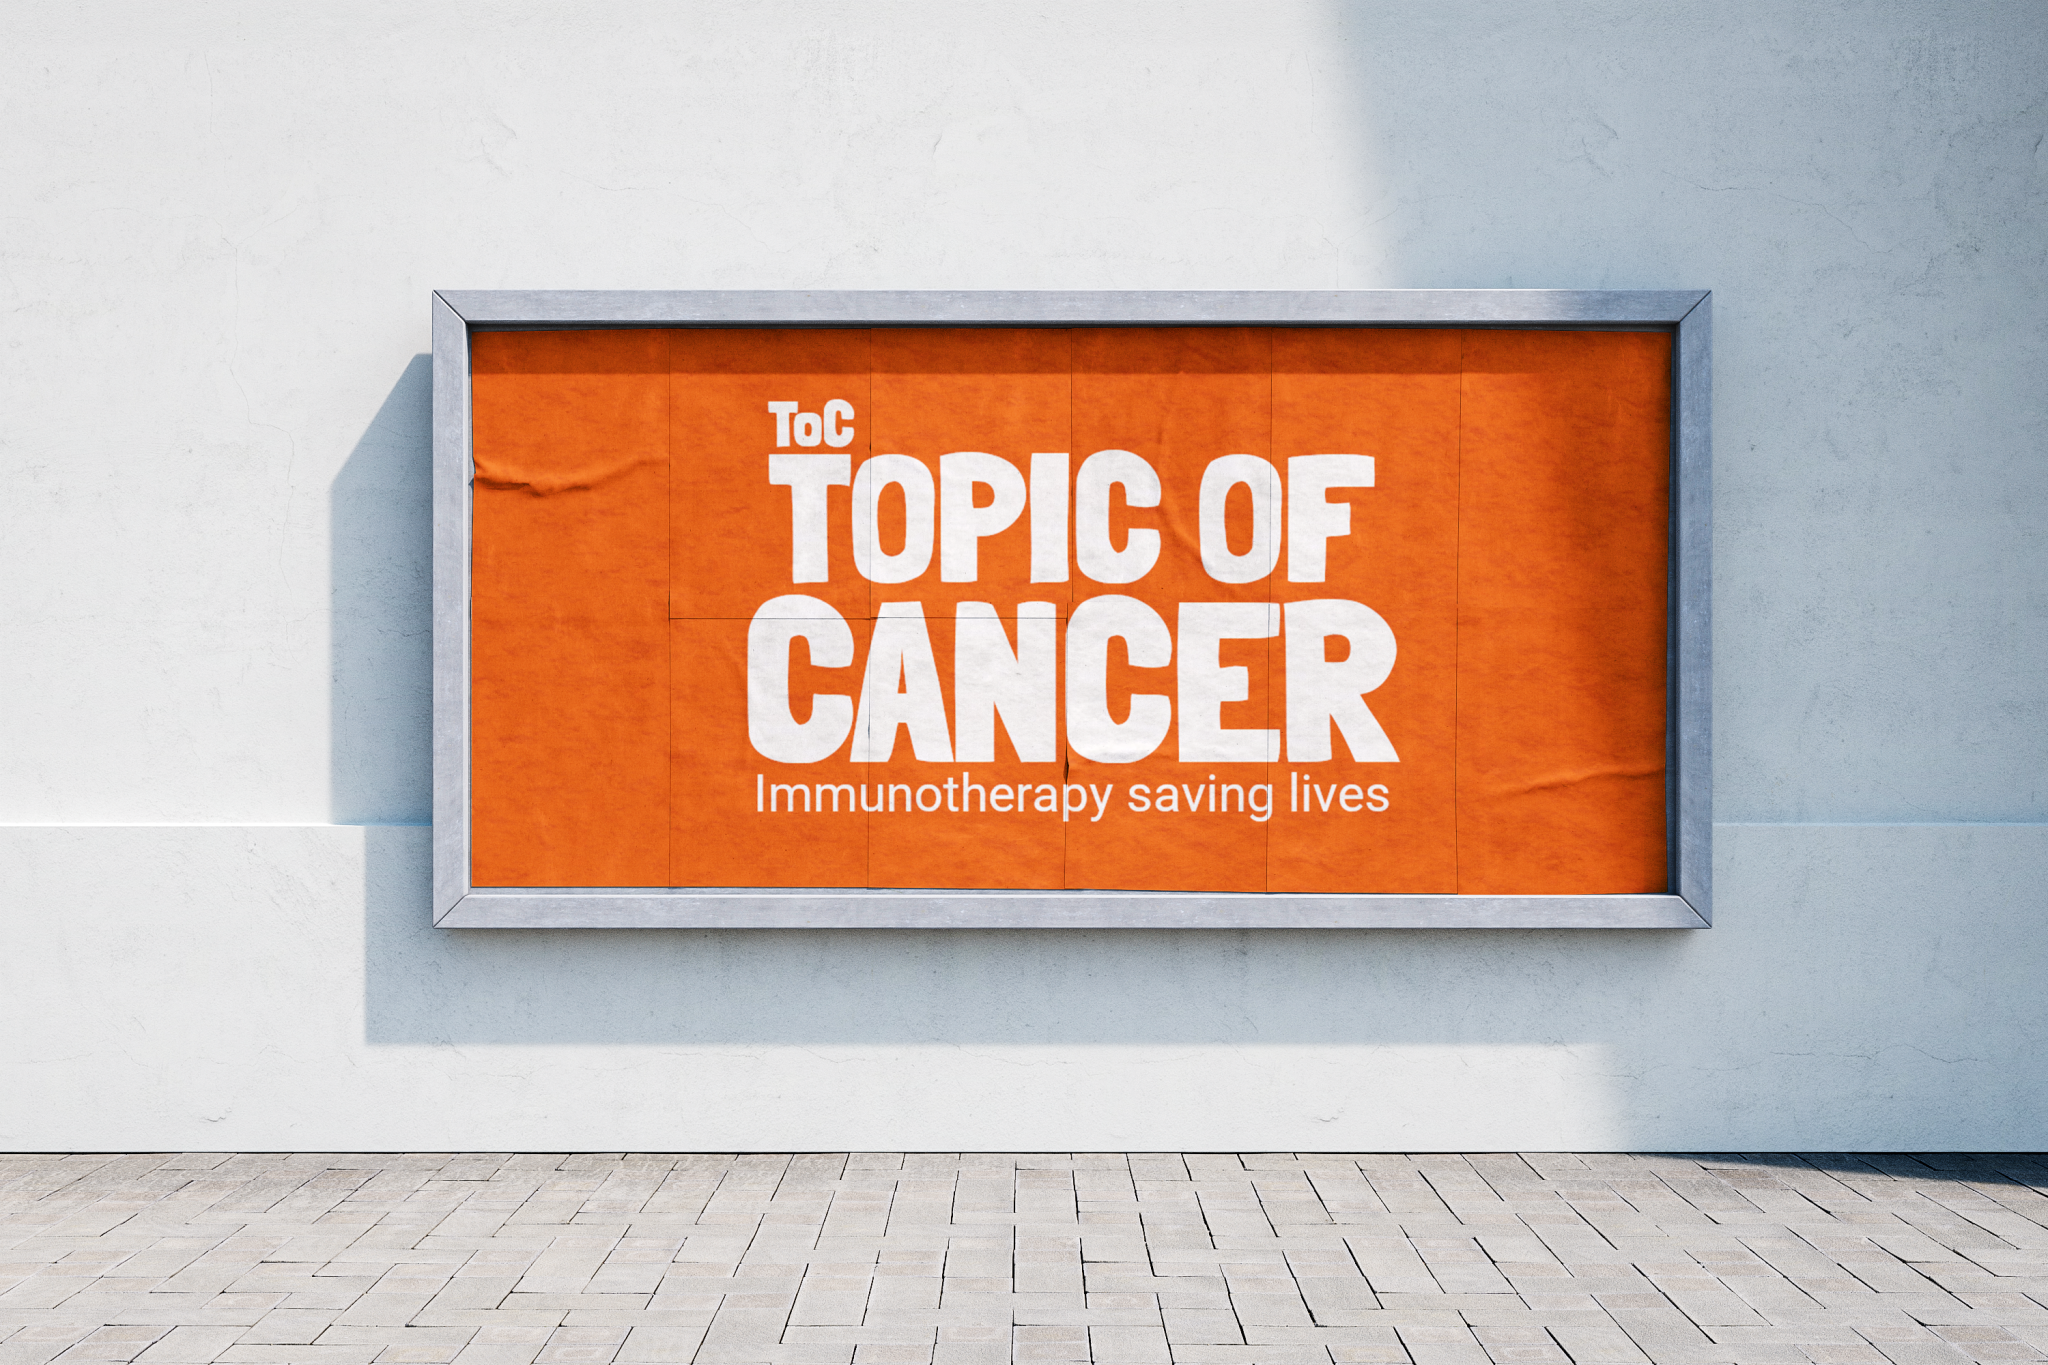 The Topic of Cancer